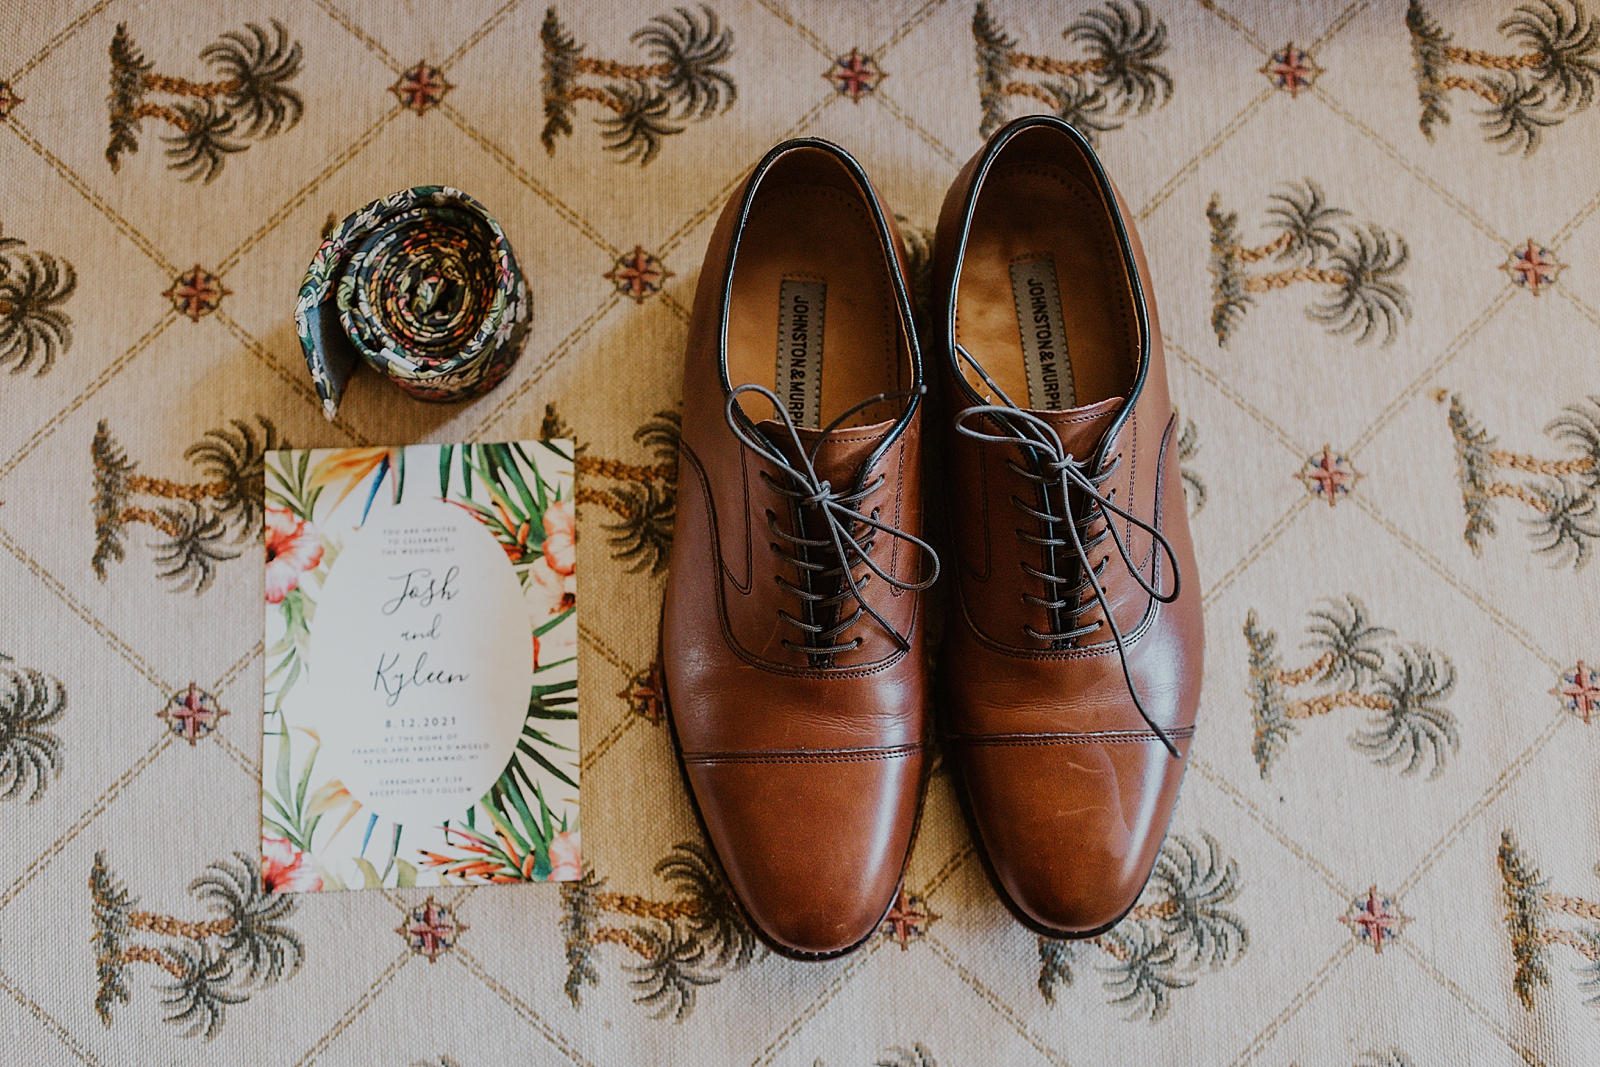 Detail shot of Groom's shoes tie and invitation